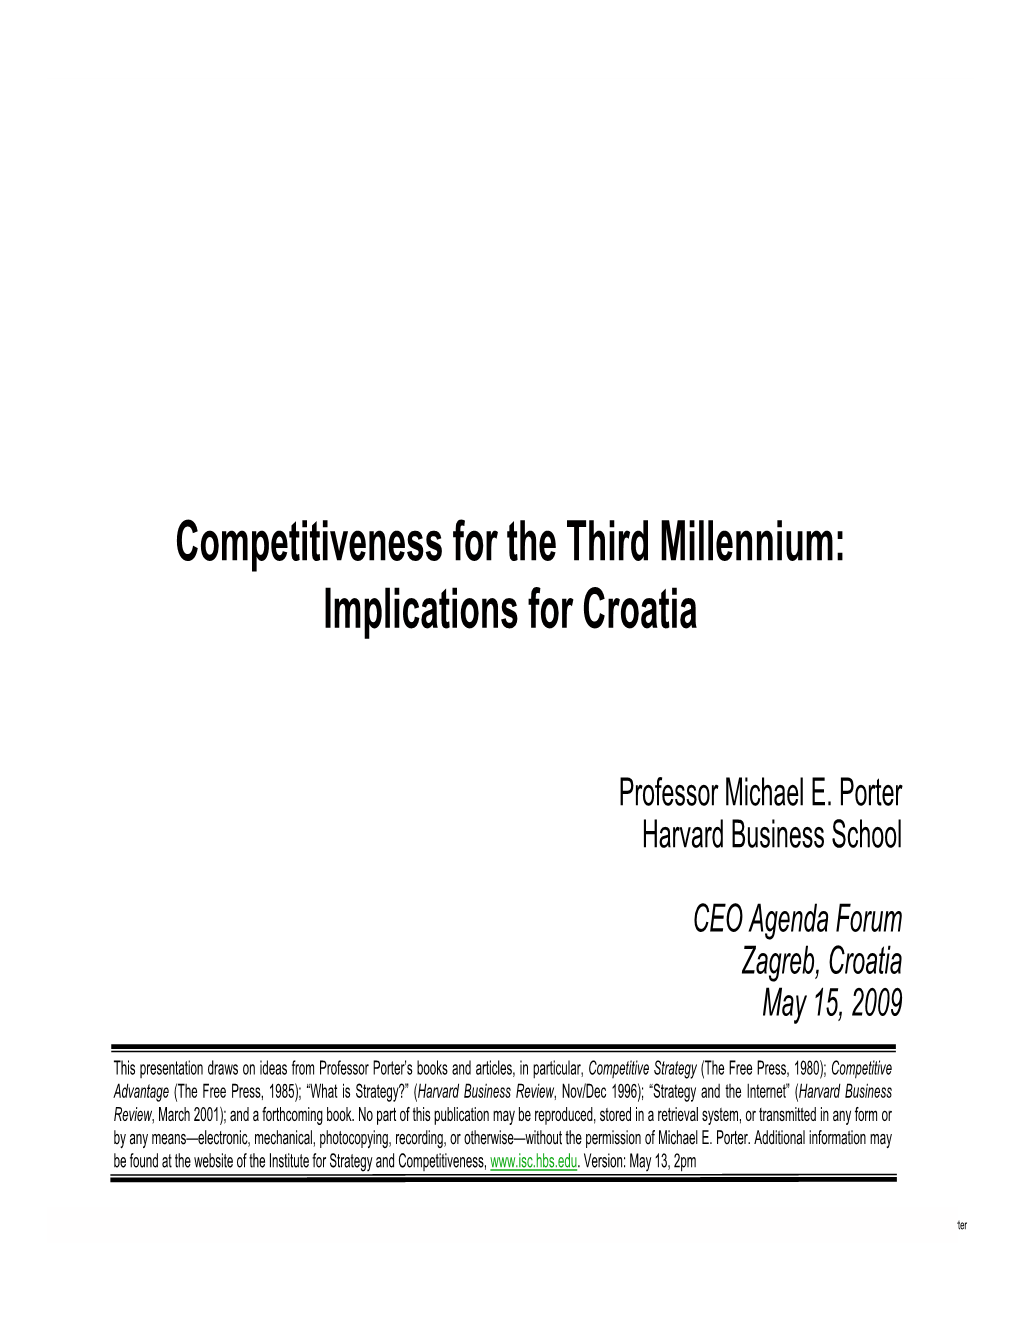 Competitiveness for the Third Millennium: Implications for Croatia